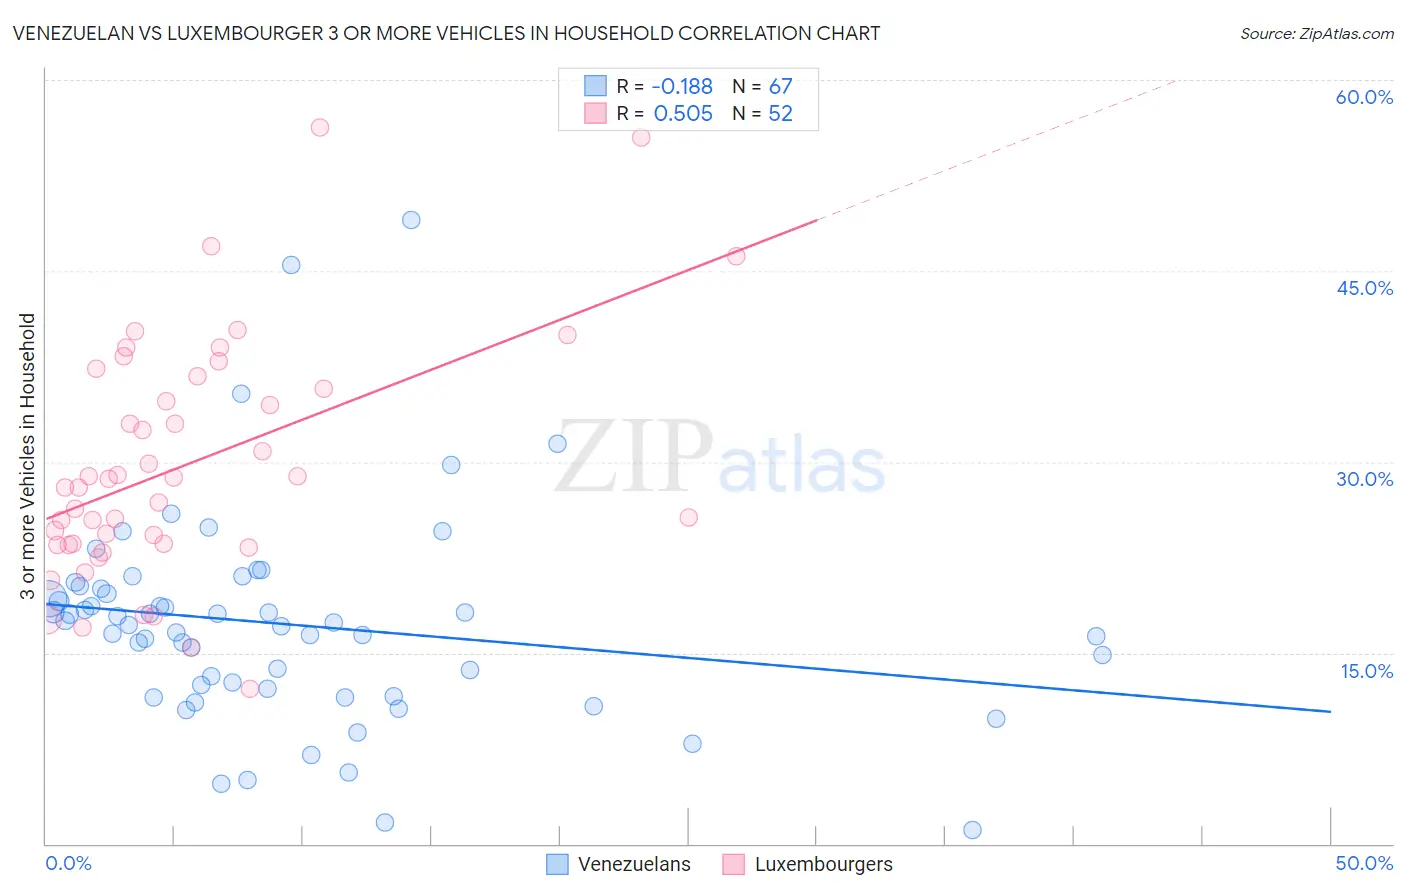 Venezuelan vs Luxembourger 3 or more Vehicles in Household